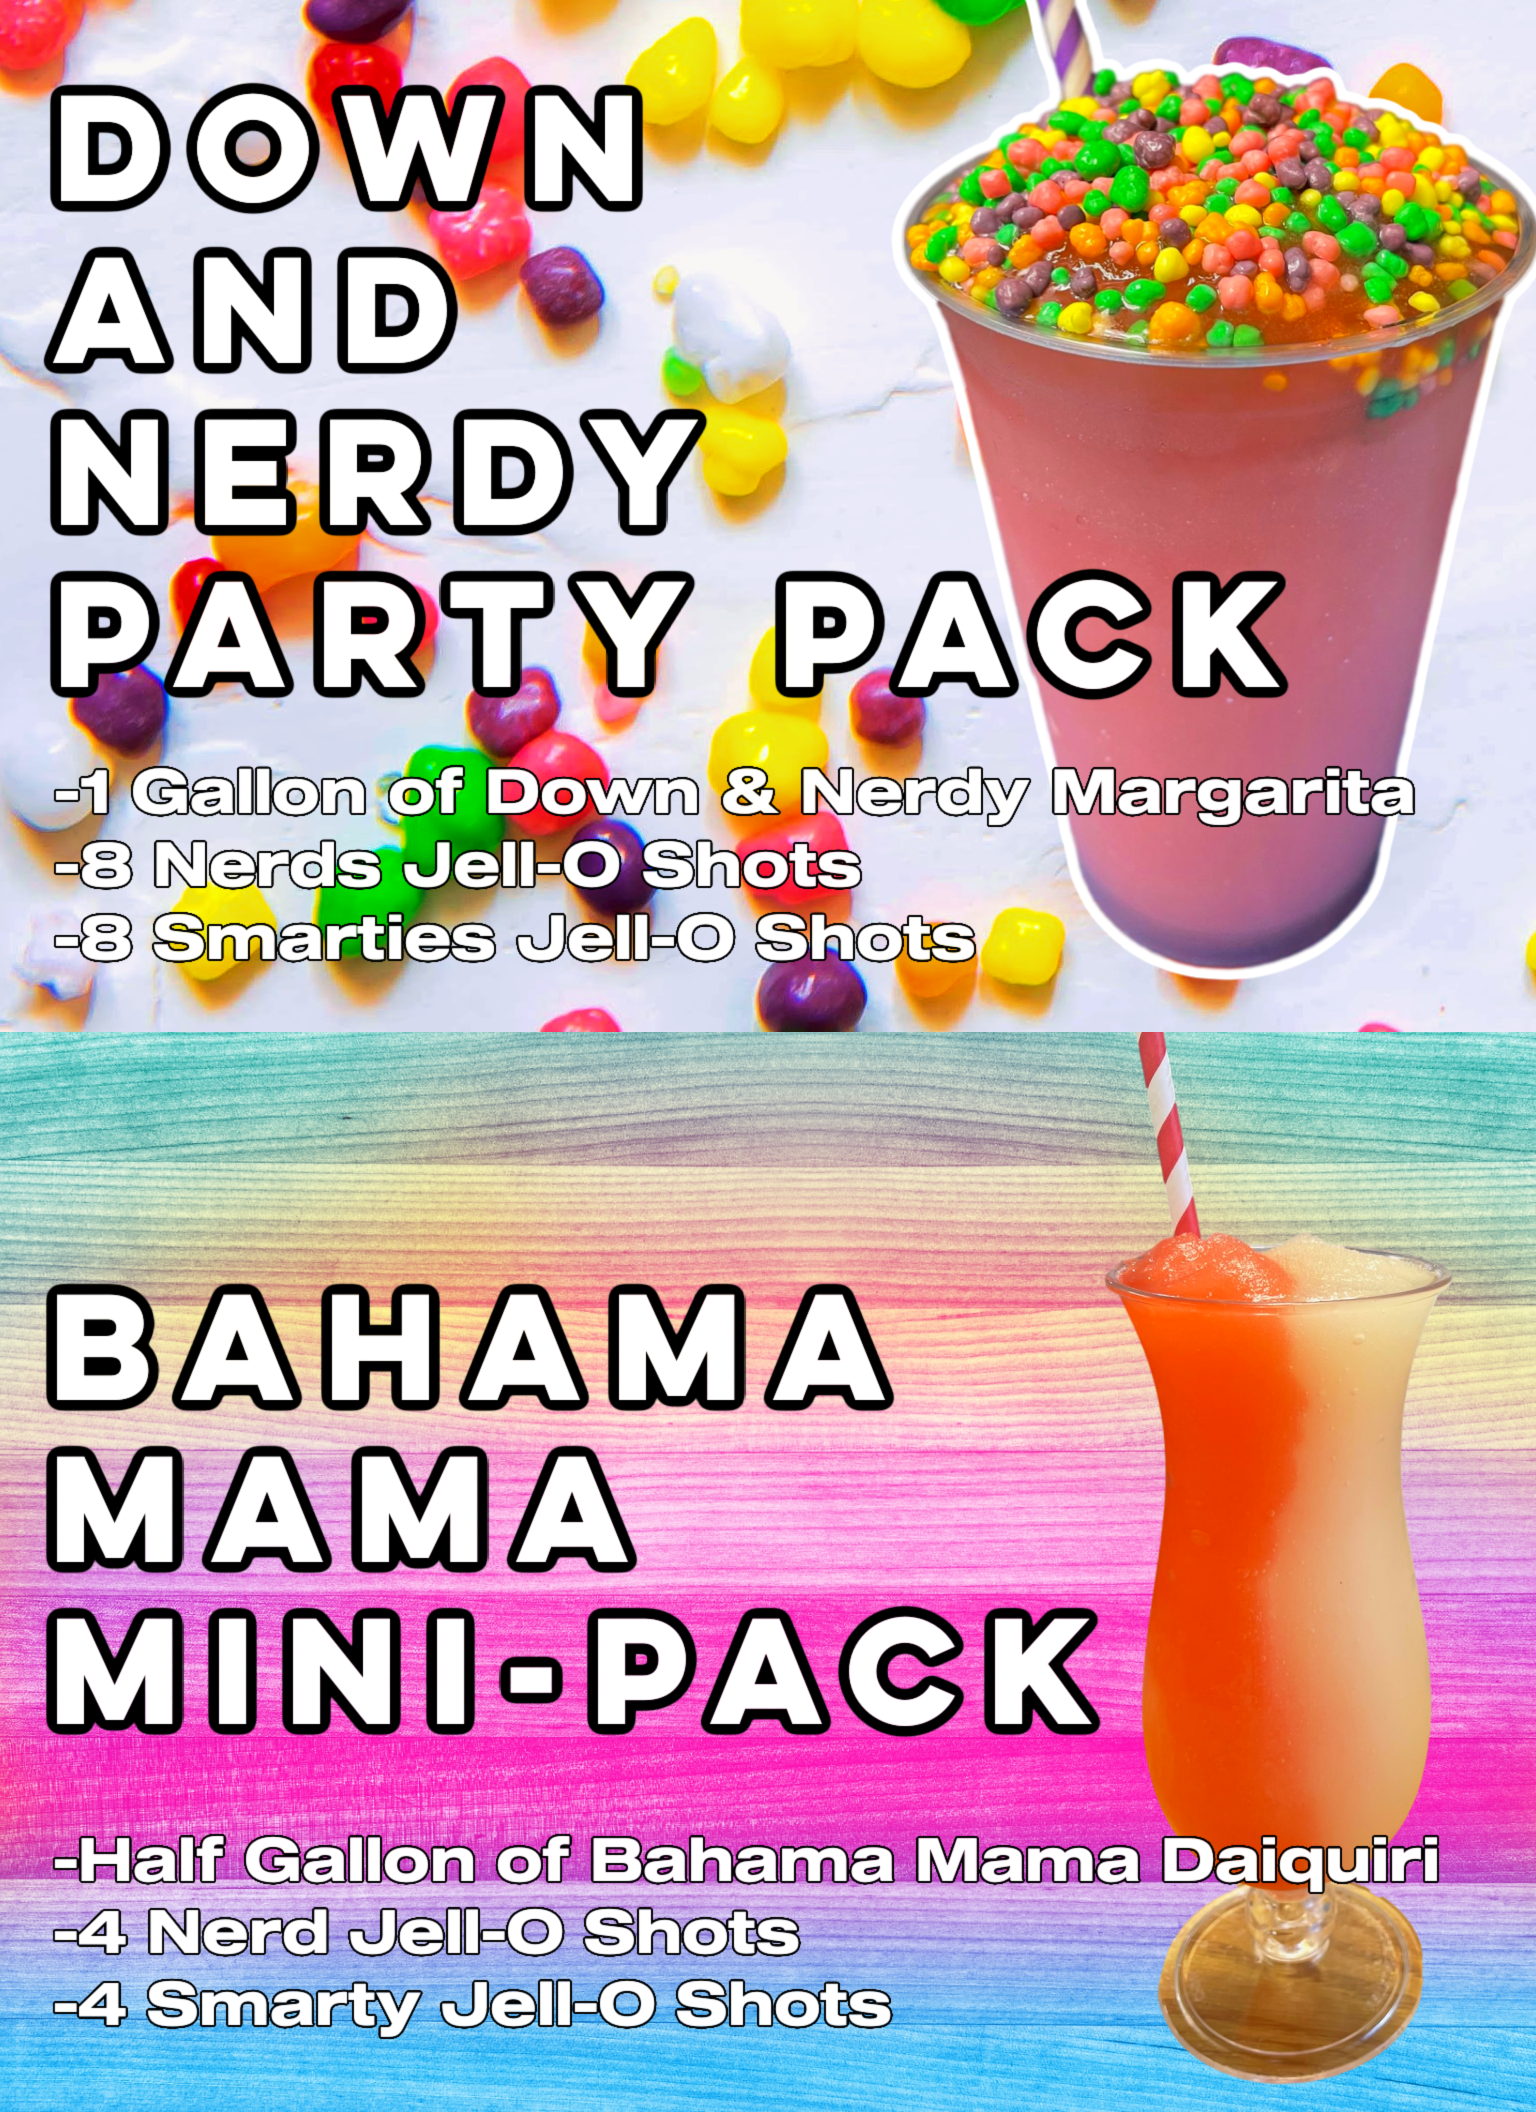 Down and Nerdy Party Pack ($46.50) & Bahama Mama Mini Party Pack ($24.99)